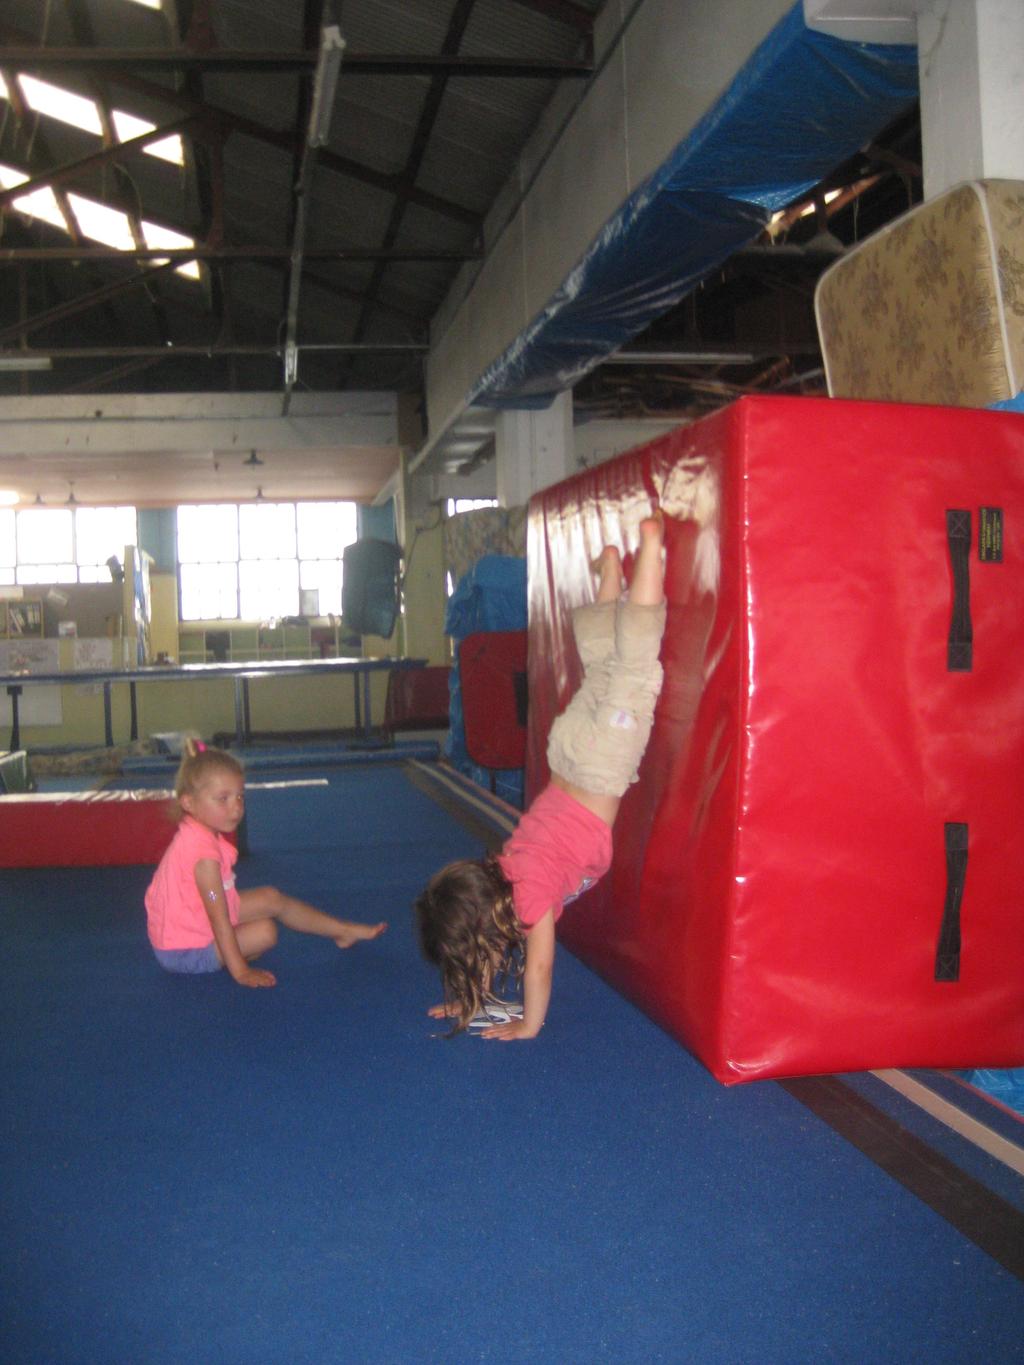 Participants in the trampoline classes must wear socks. Trampoline shoes are optional. Clothing that covers the elbows and knees is recommended.